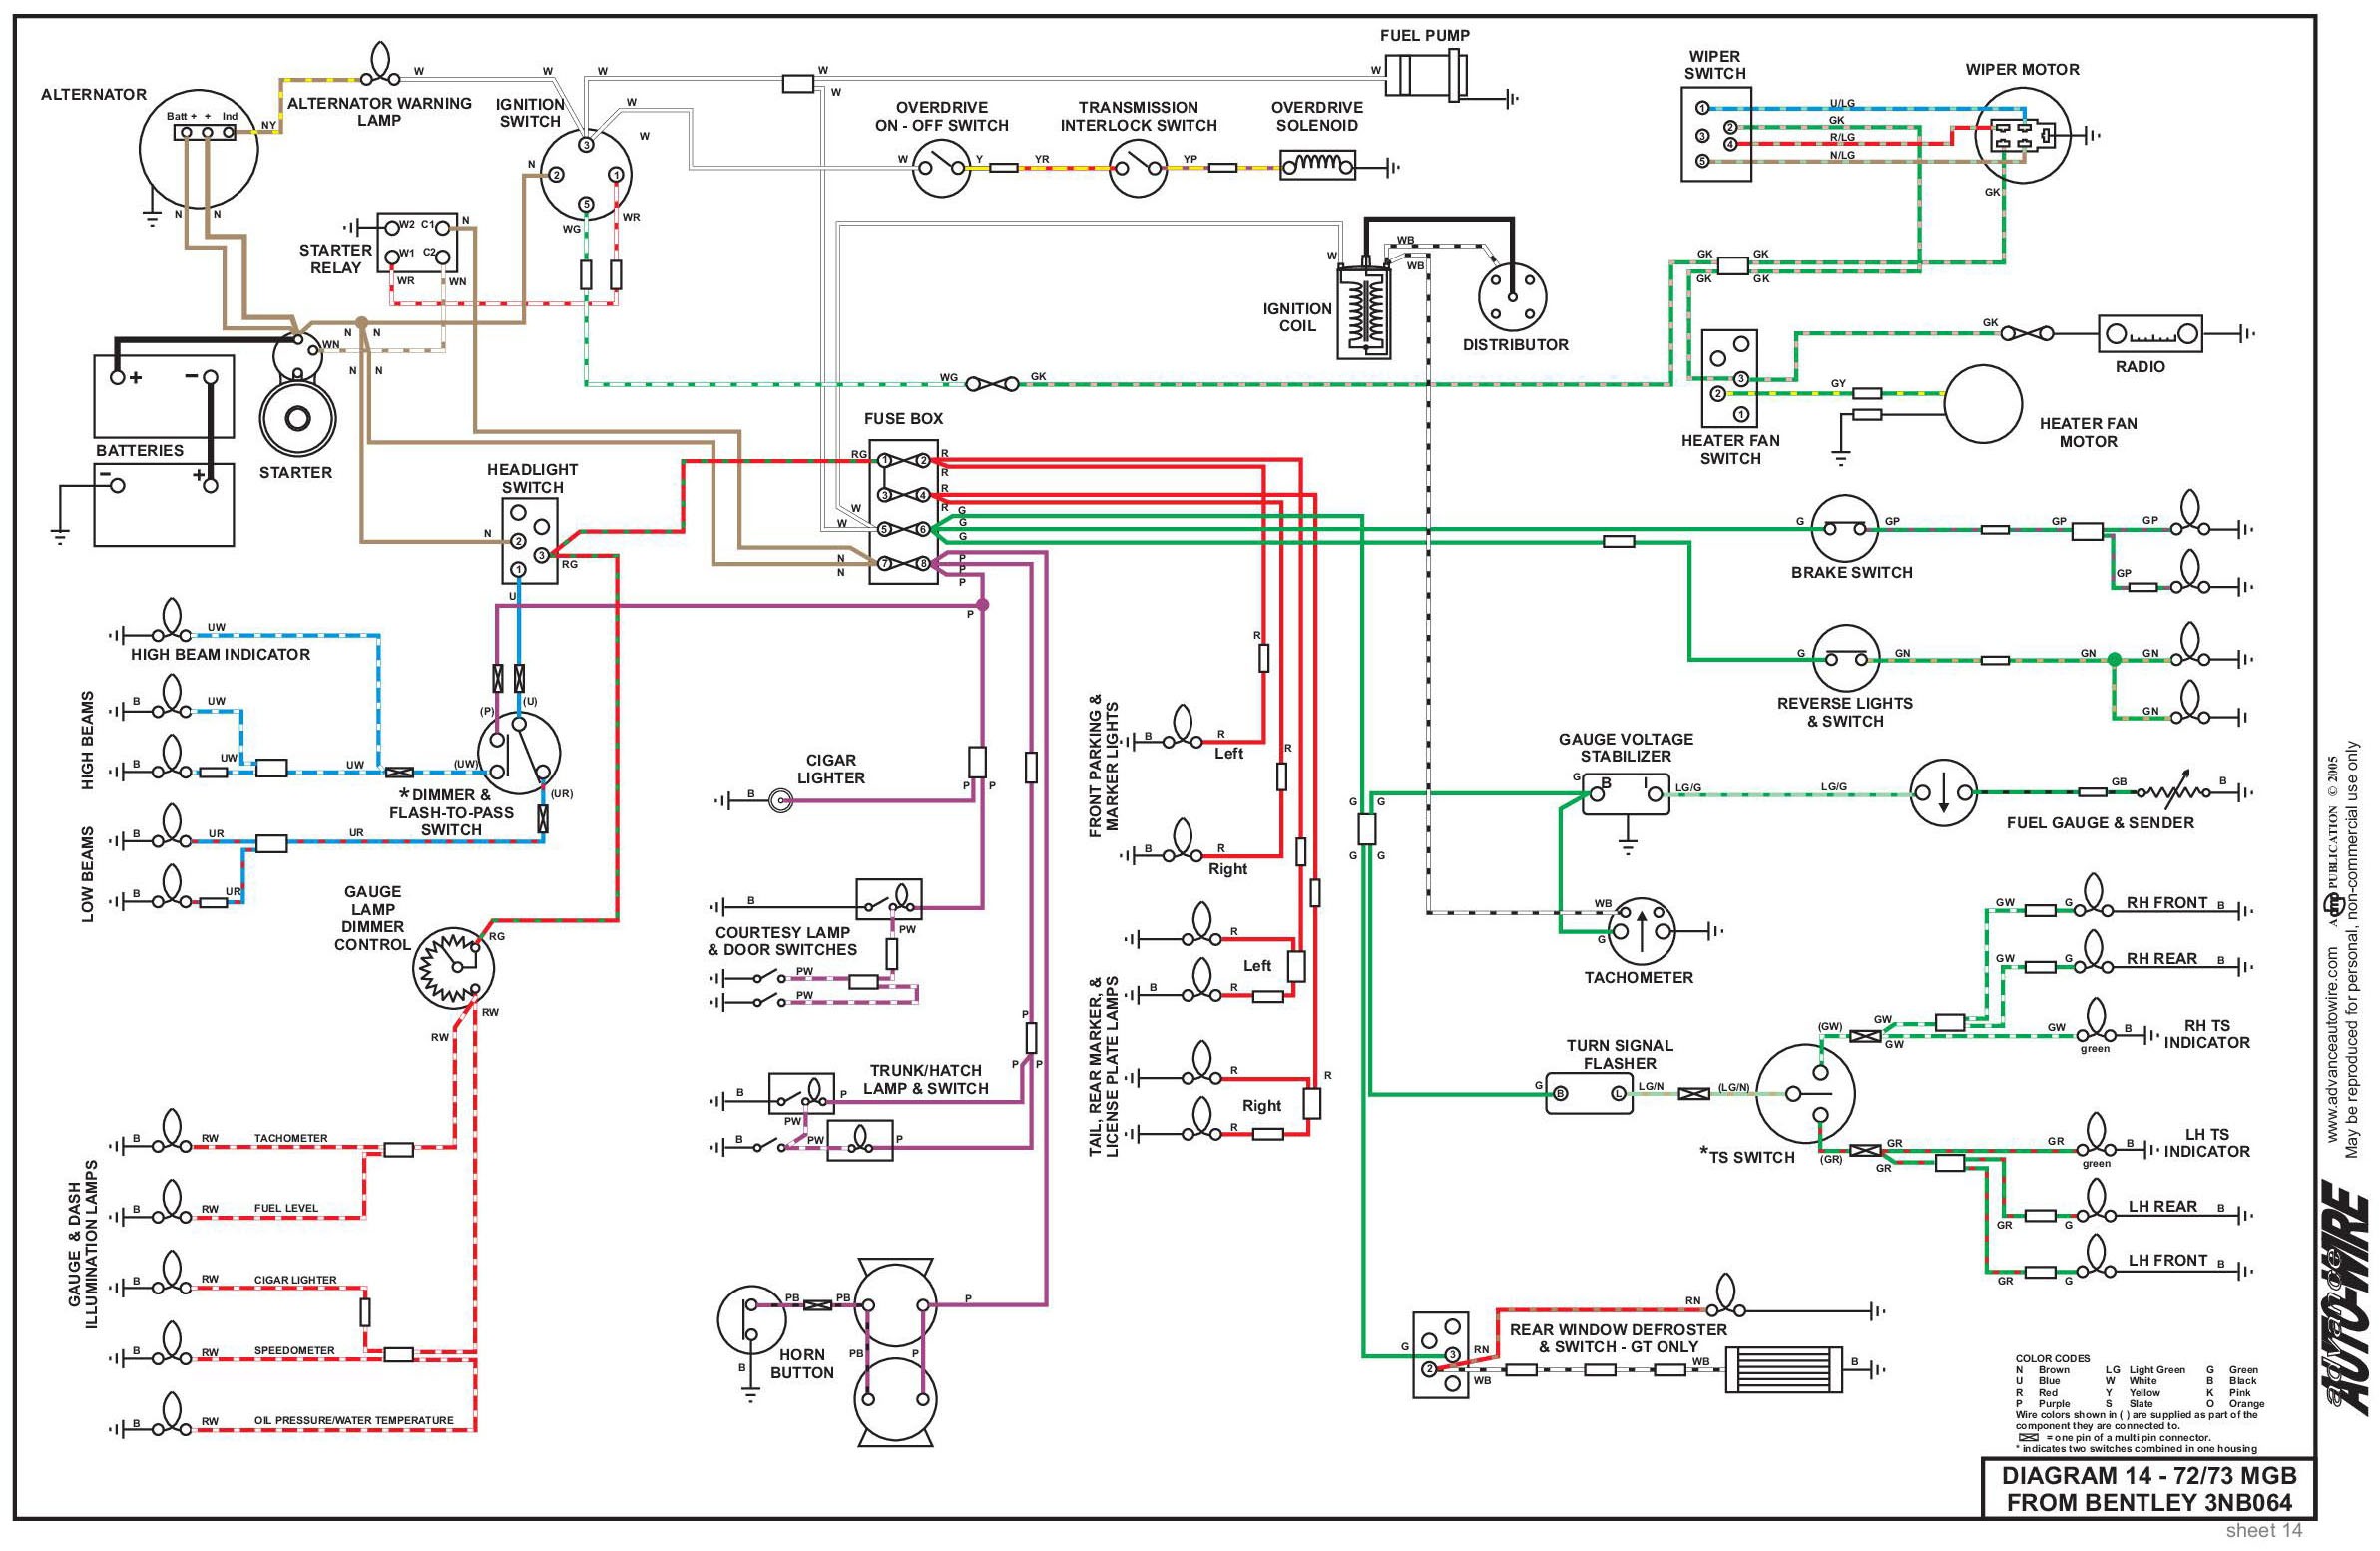 3 Prong Flasher Wiring Diagram Electrical System Of 3 Prong Flasher Wiring Diagram